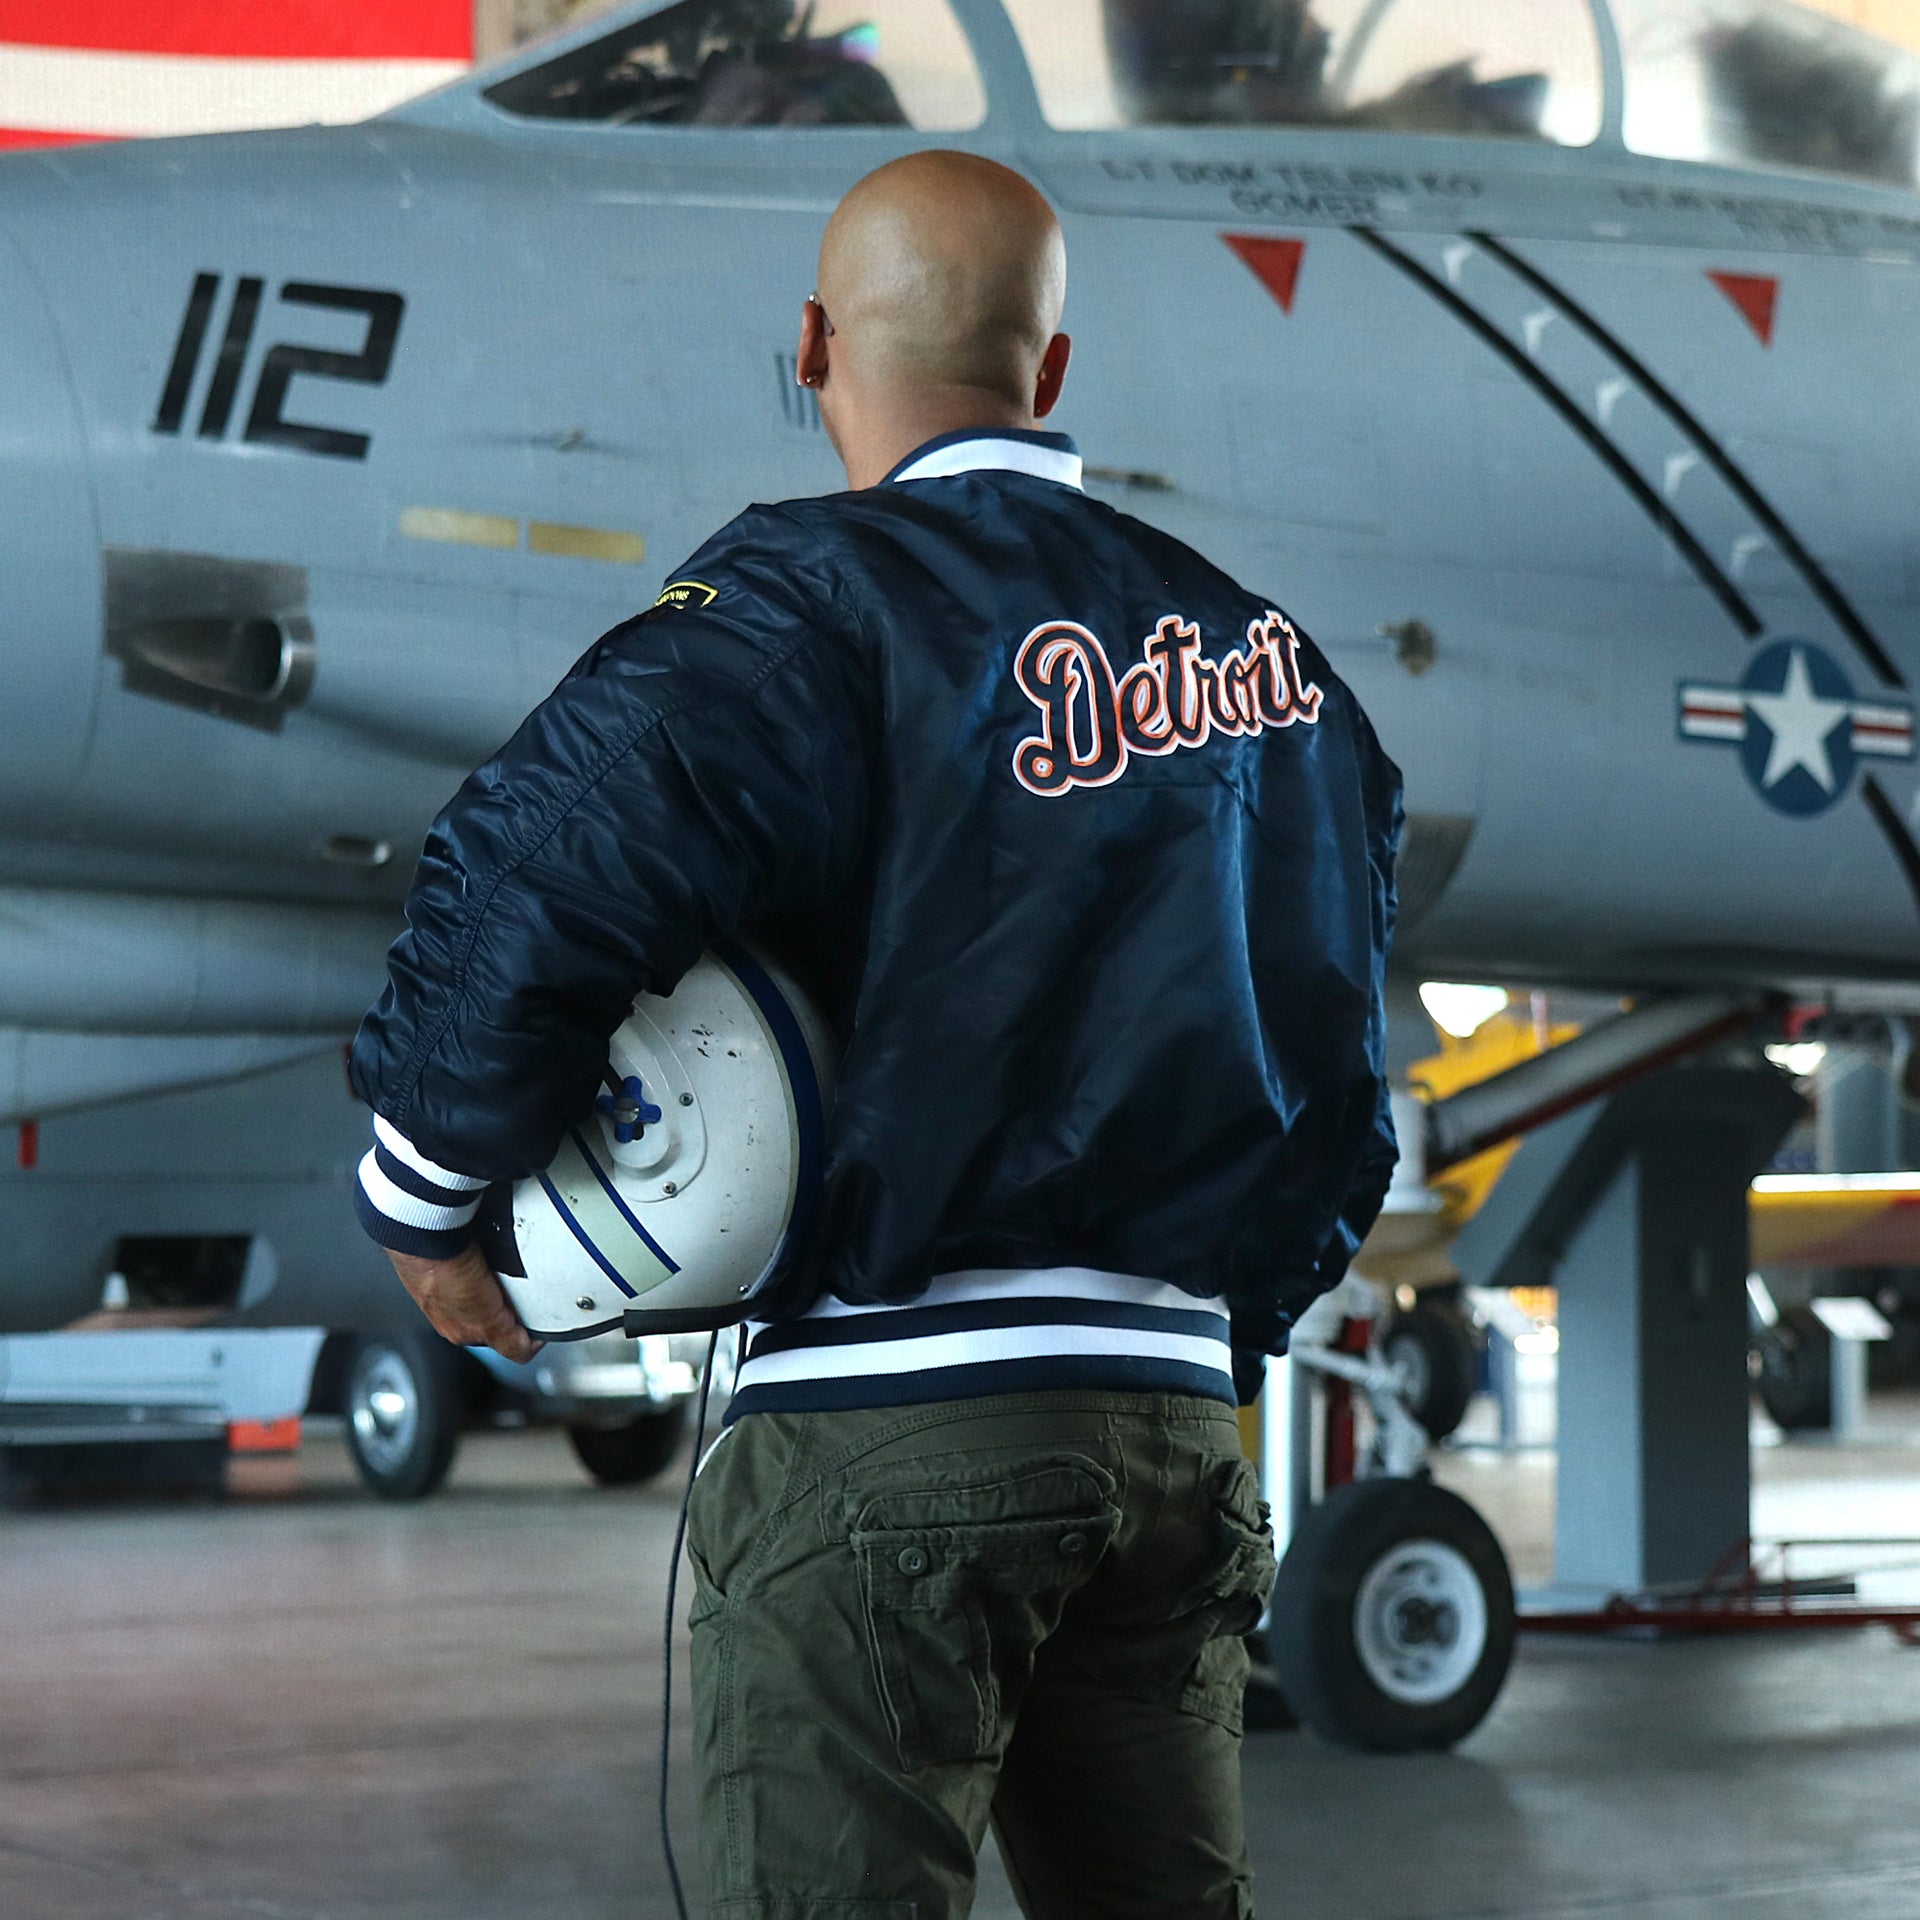 The backside of the Detroit Tigers MLB Patch Alpha Industries Reversible Bomber Jacket With Camo Liner | Navy Blue Bomber Jacket with matching jacket